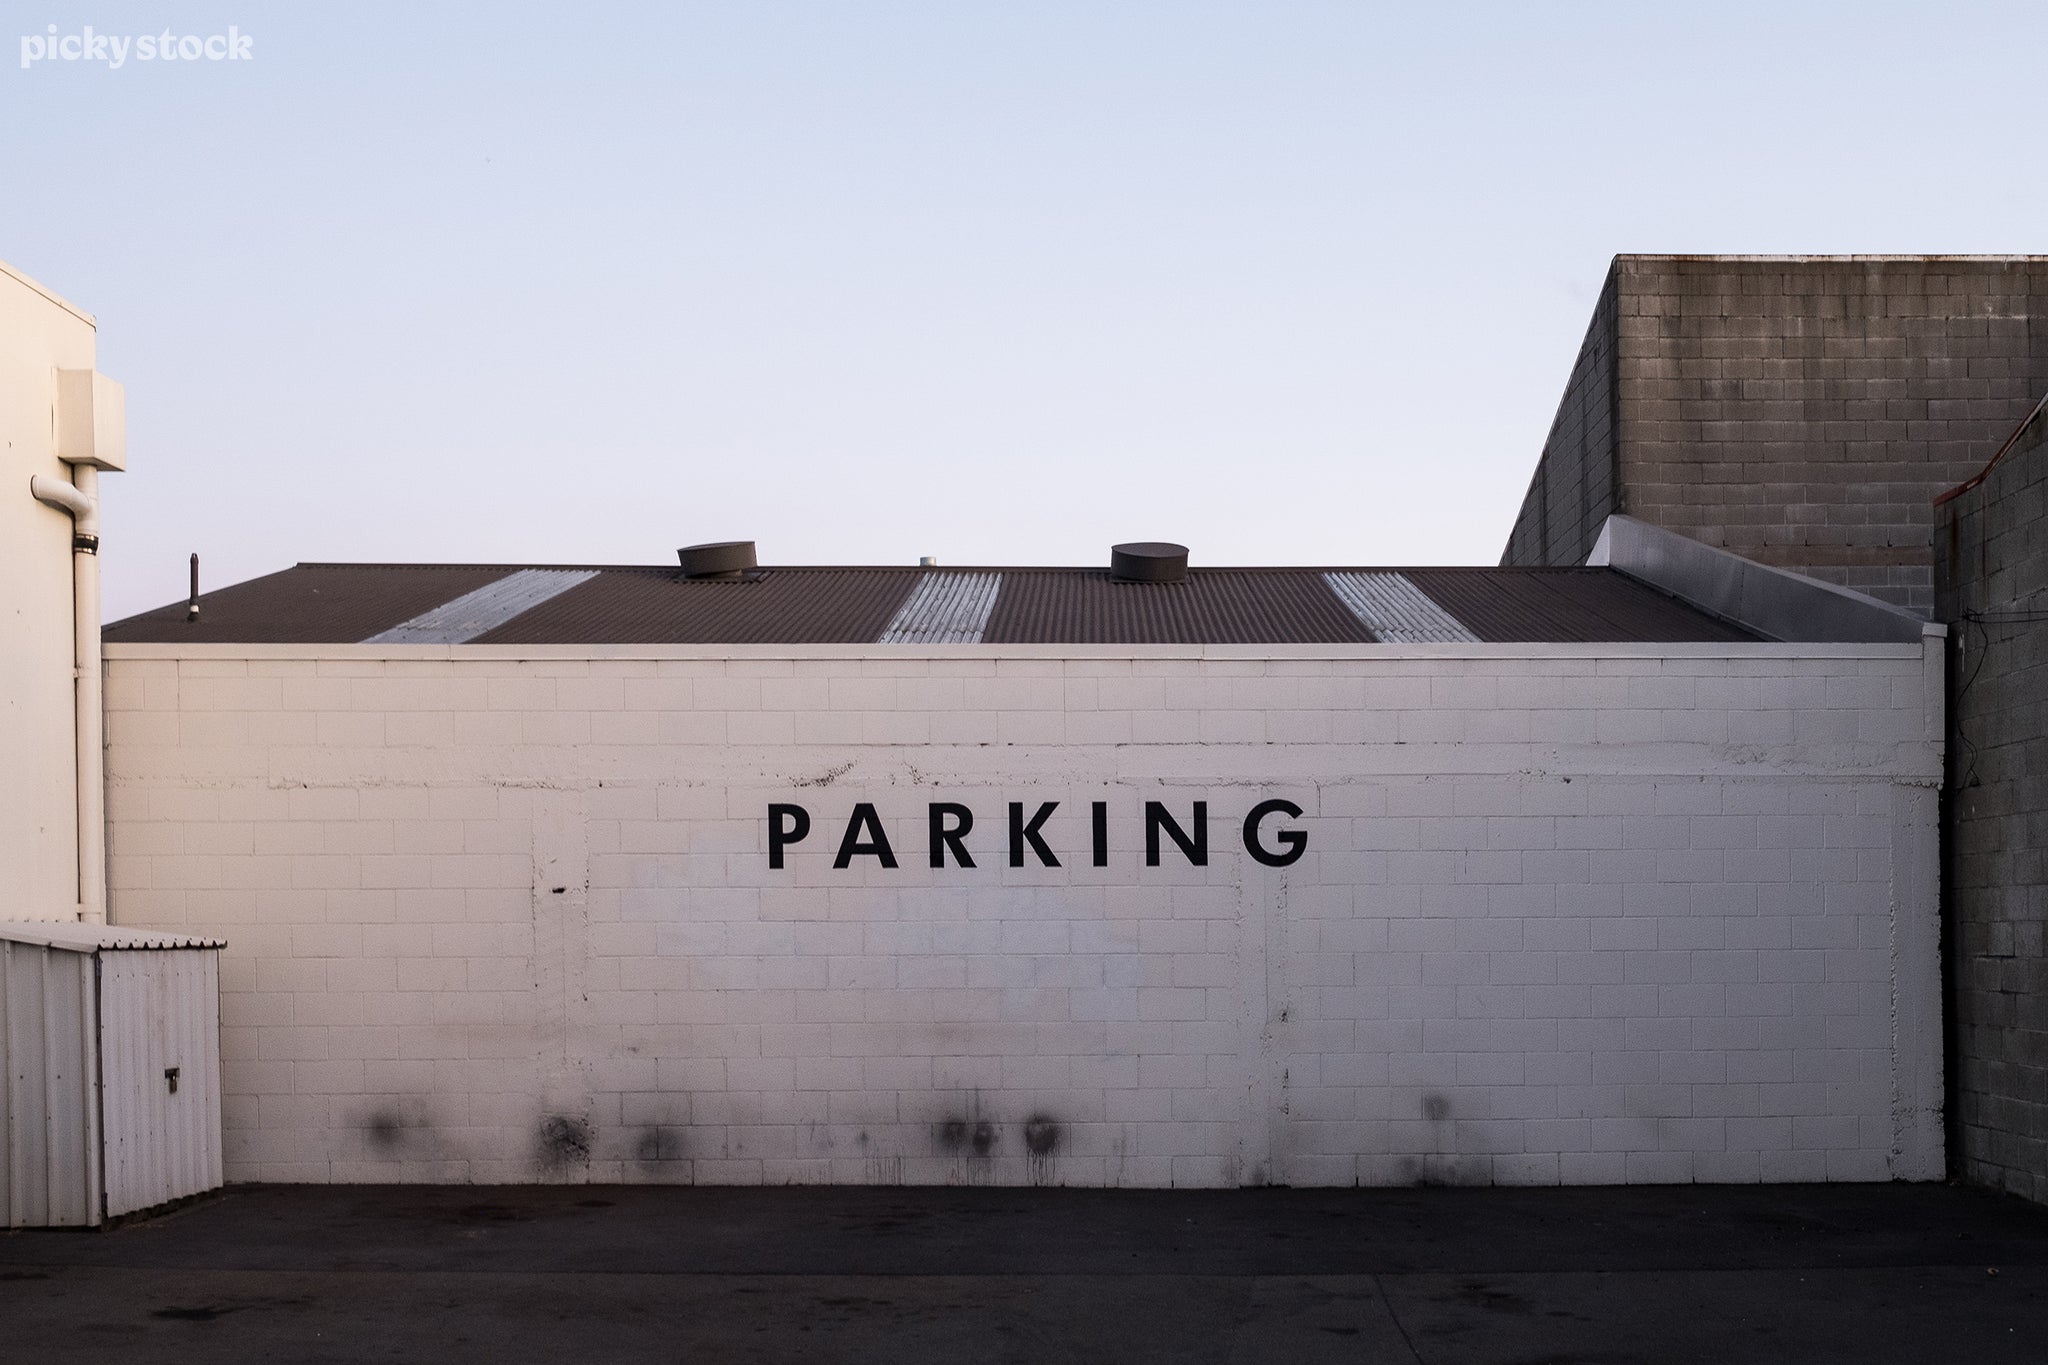 Landscape of a white brick wall with large block letters reading ‘parking’ in spaced lettering, the walls if caked with dirt and exhaust from backfire. The surrounding buildings of grey brick block the light and cast a cool light over the dark asphalt.